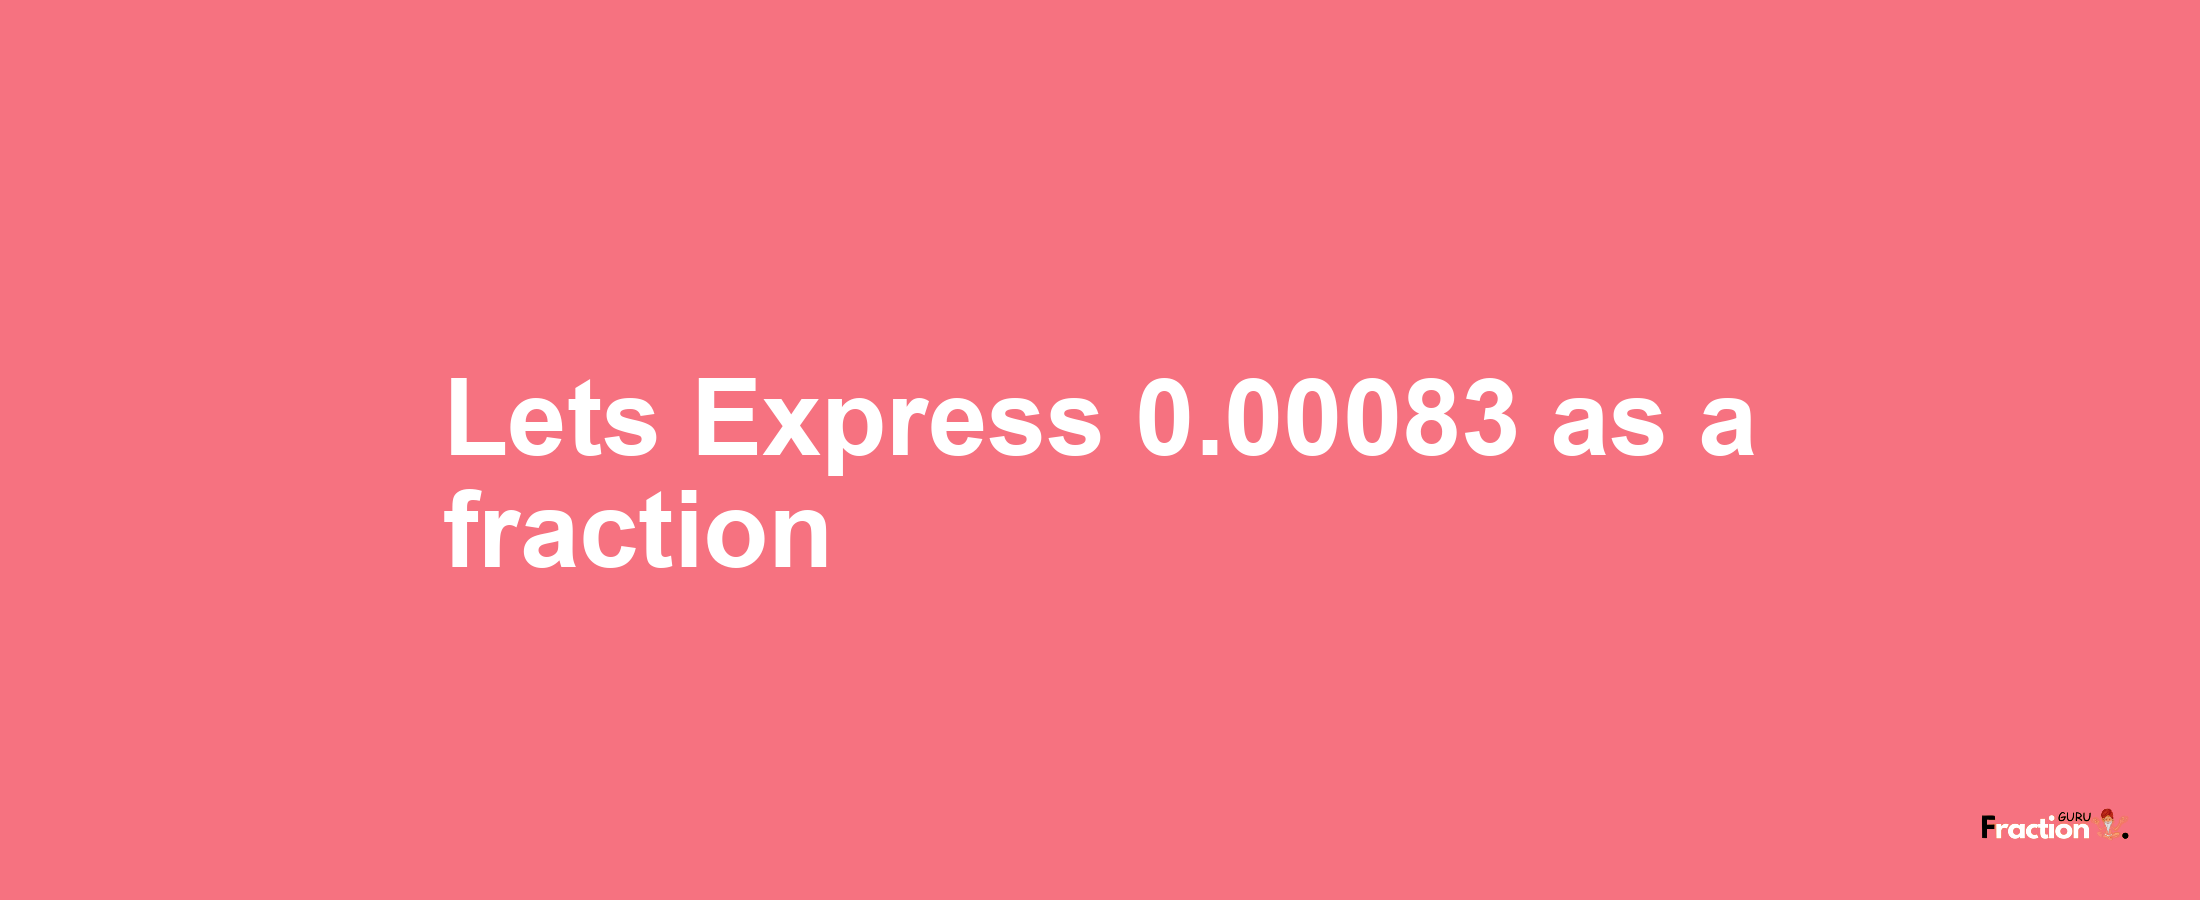 Lets Express 0.00083 as afraction